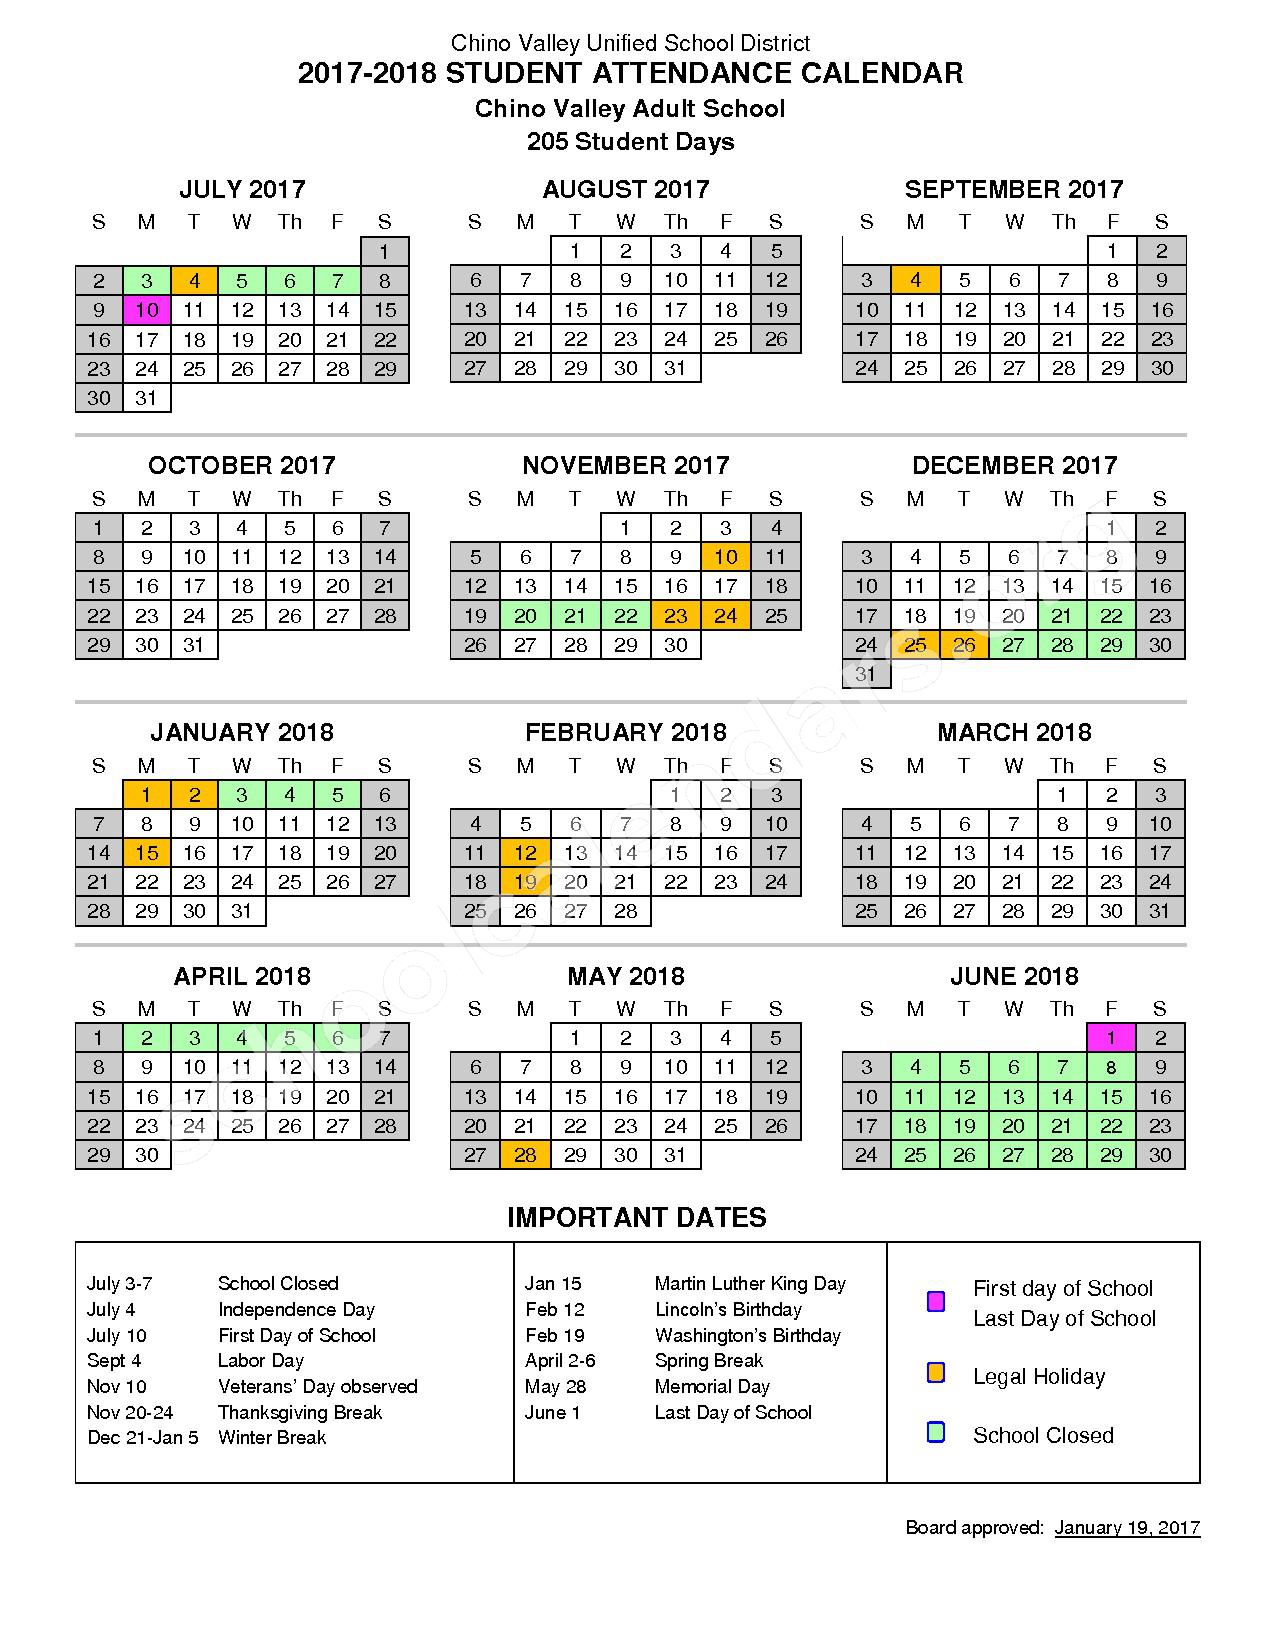 Chino Valley Unified School District Calendars Chino CA